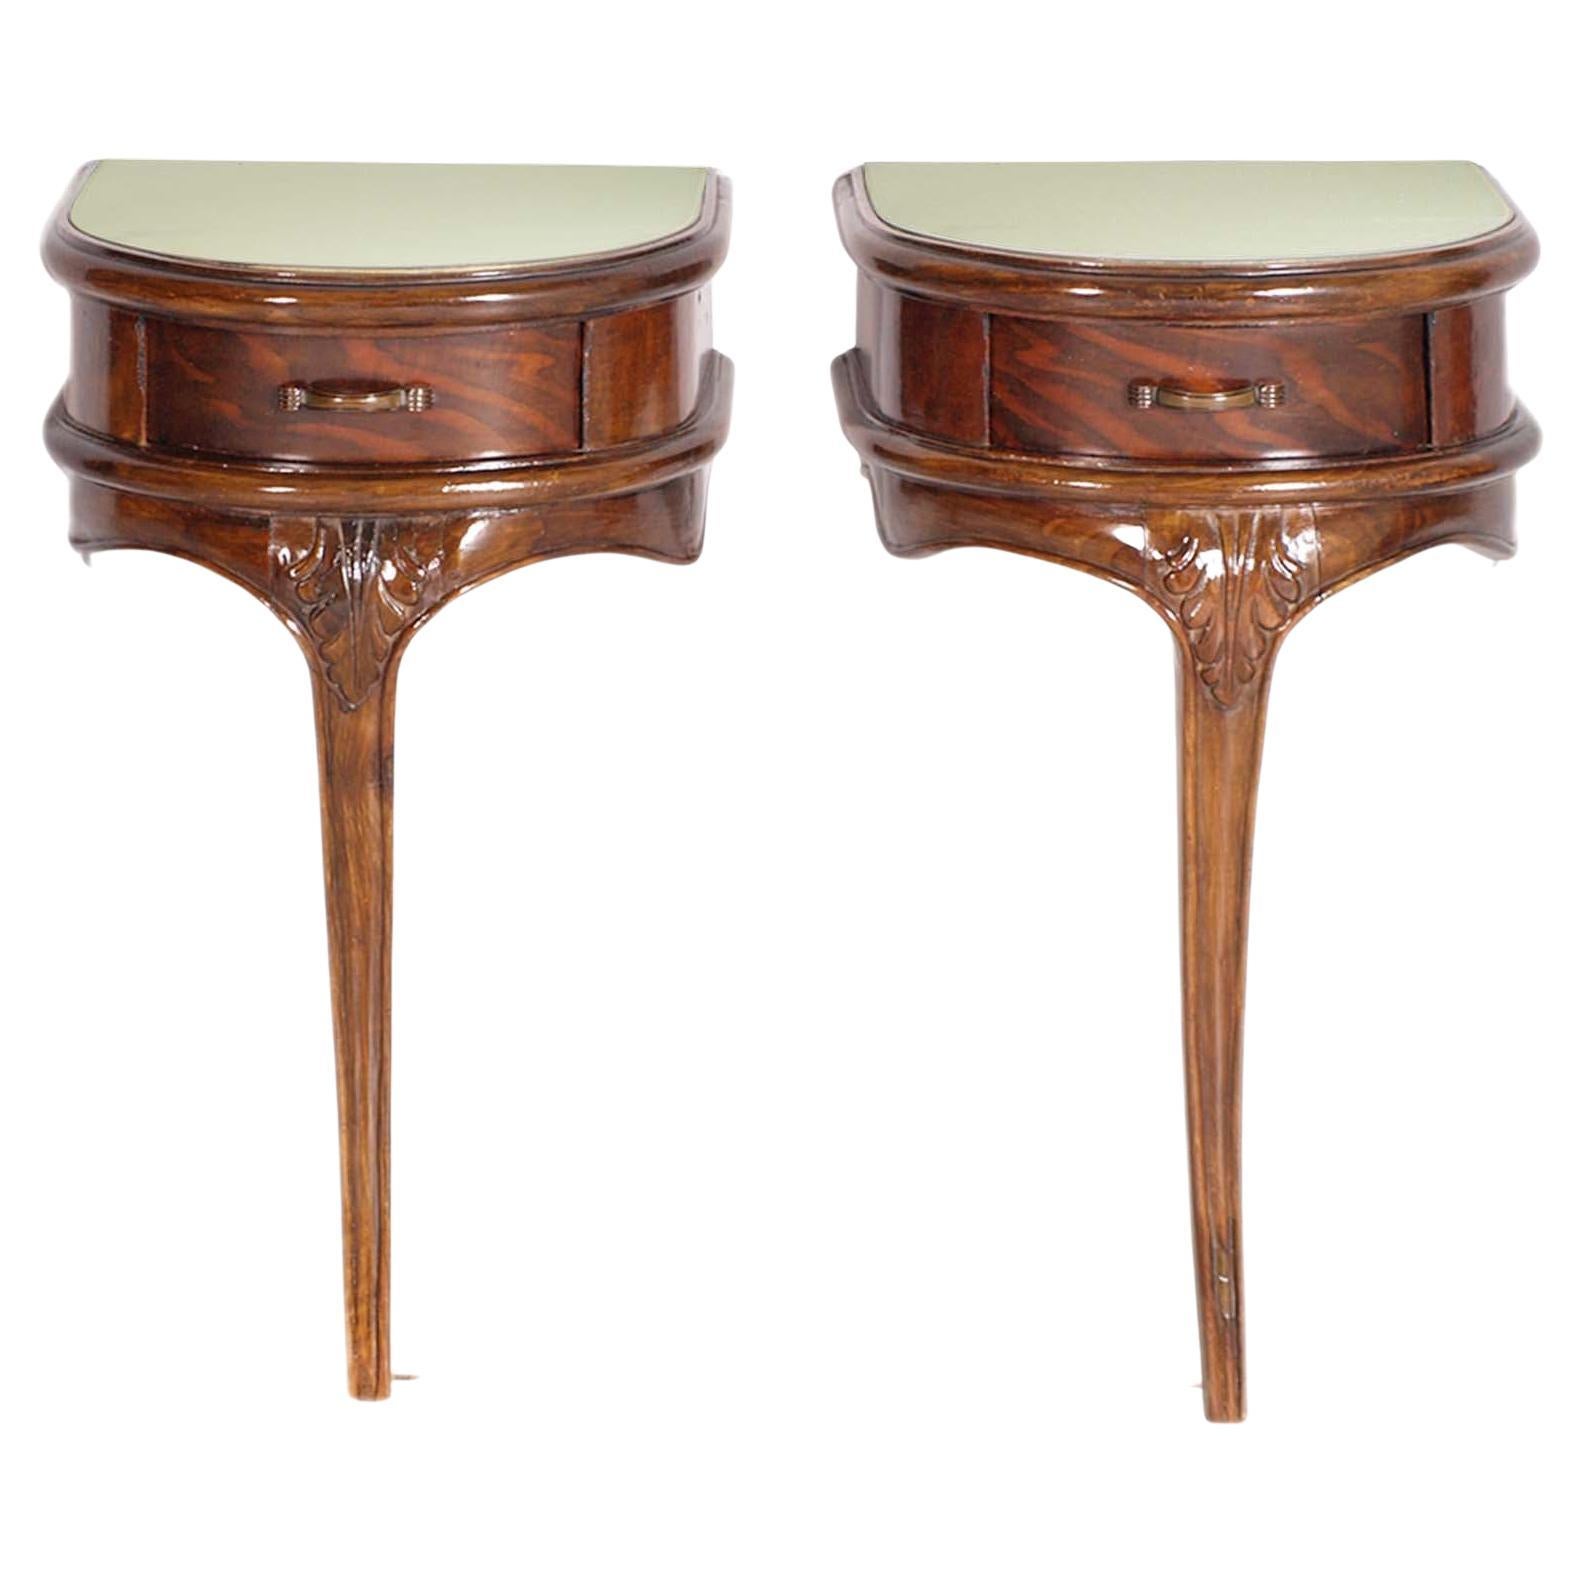 Early 20th C. Art Nouveau Nighstands in Hand-Carved Walnut by Meroni & Fossati For Sale